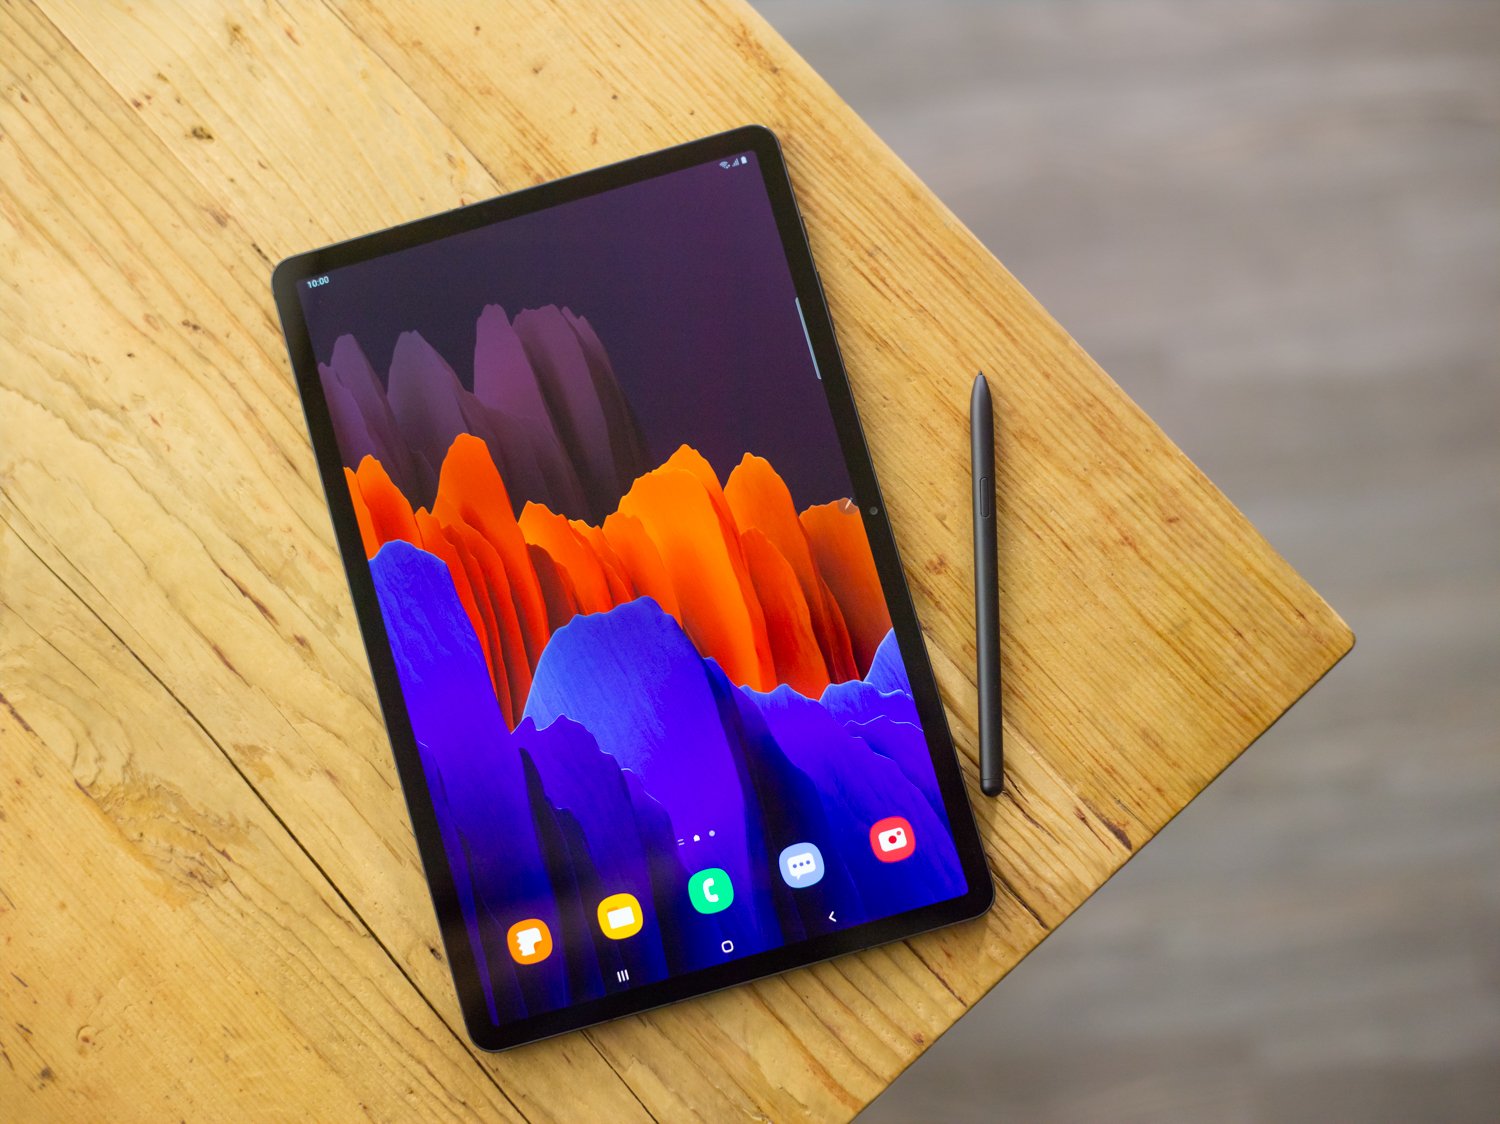 Samsung is the top tablet seller in Europe, Middle East, and Africa in Q4 2020